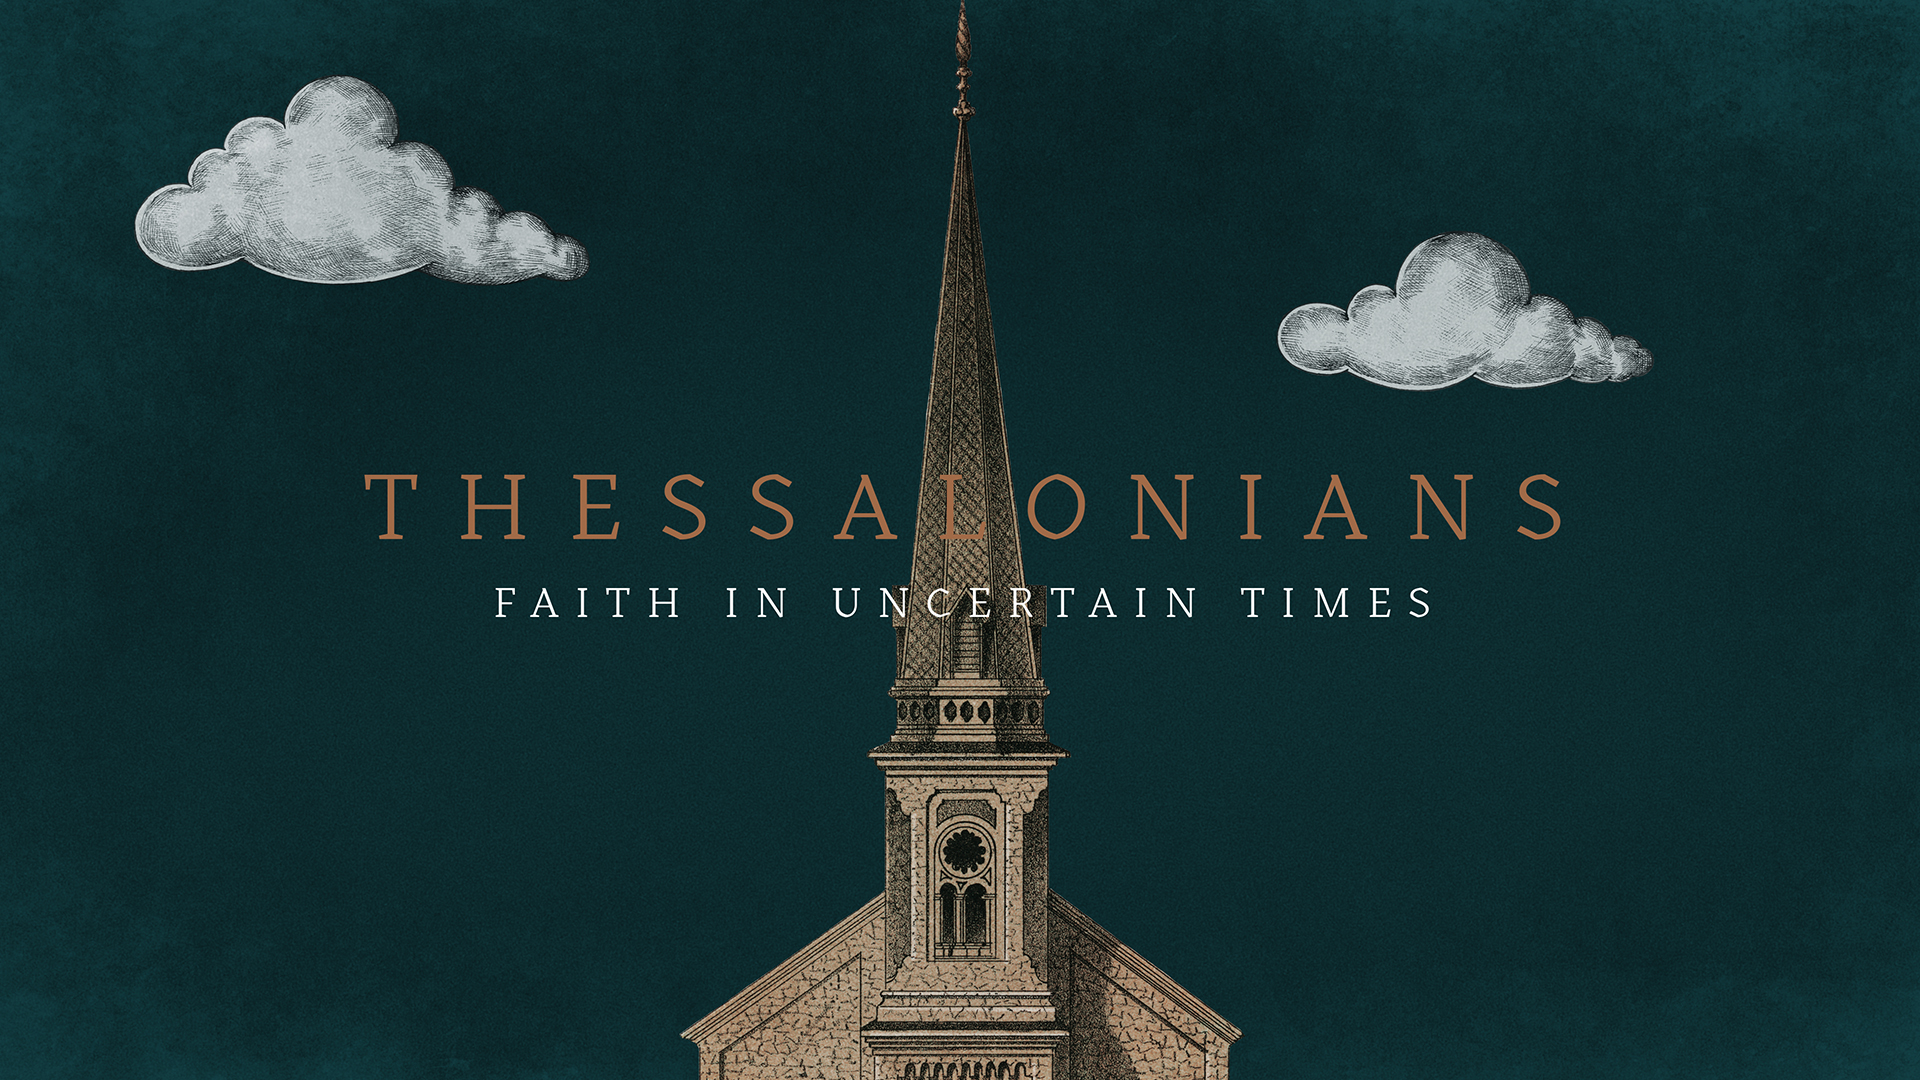 THESSALONIANS – FAITH IN UNCERTAIN TIMES: Until He Comes